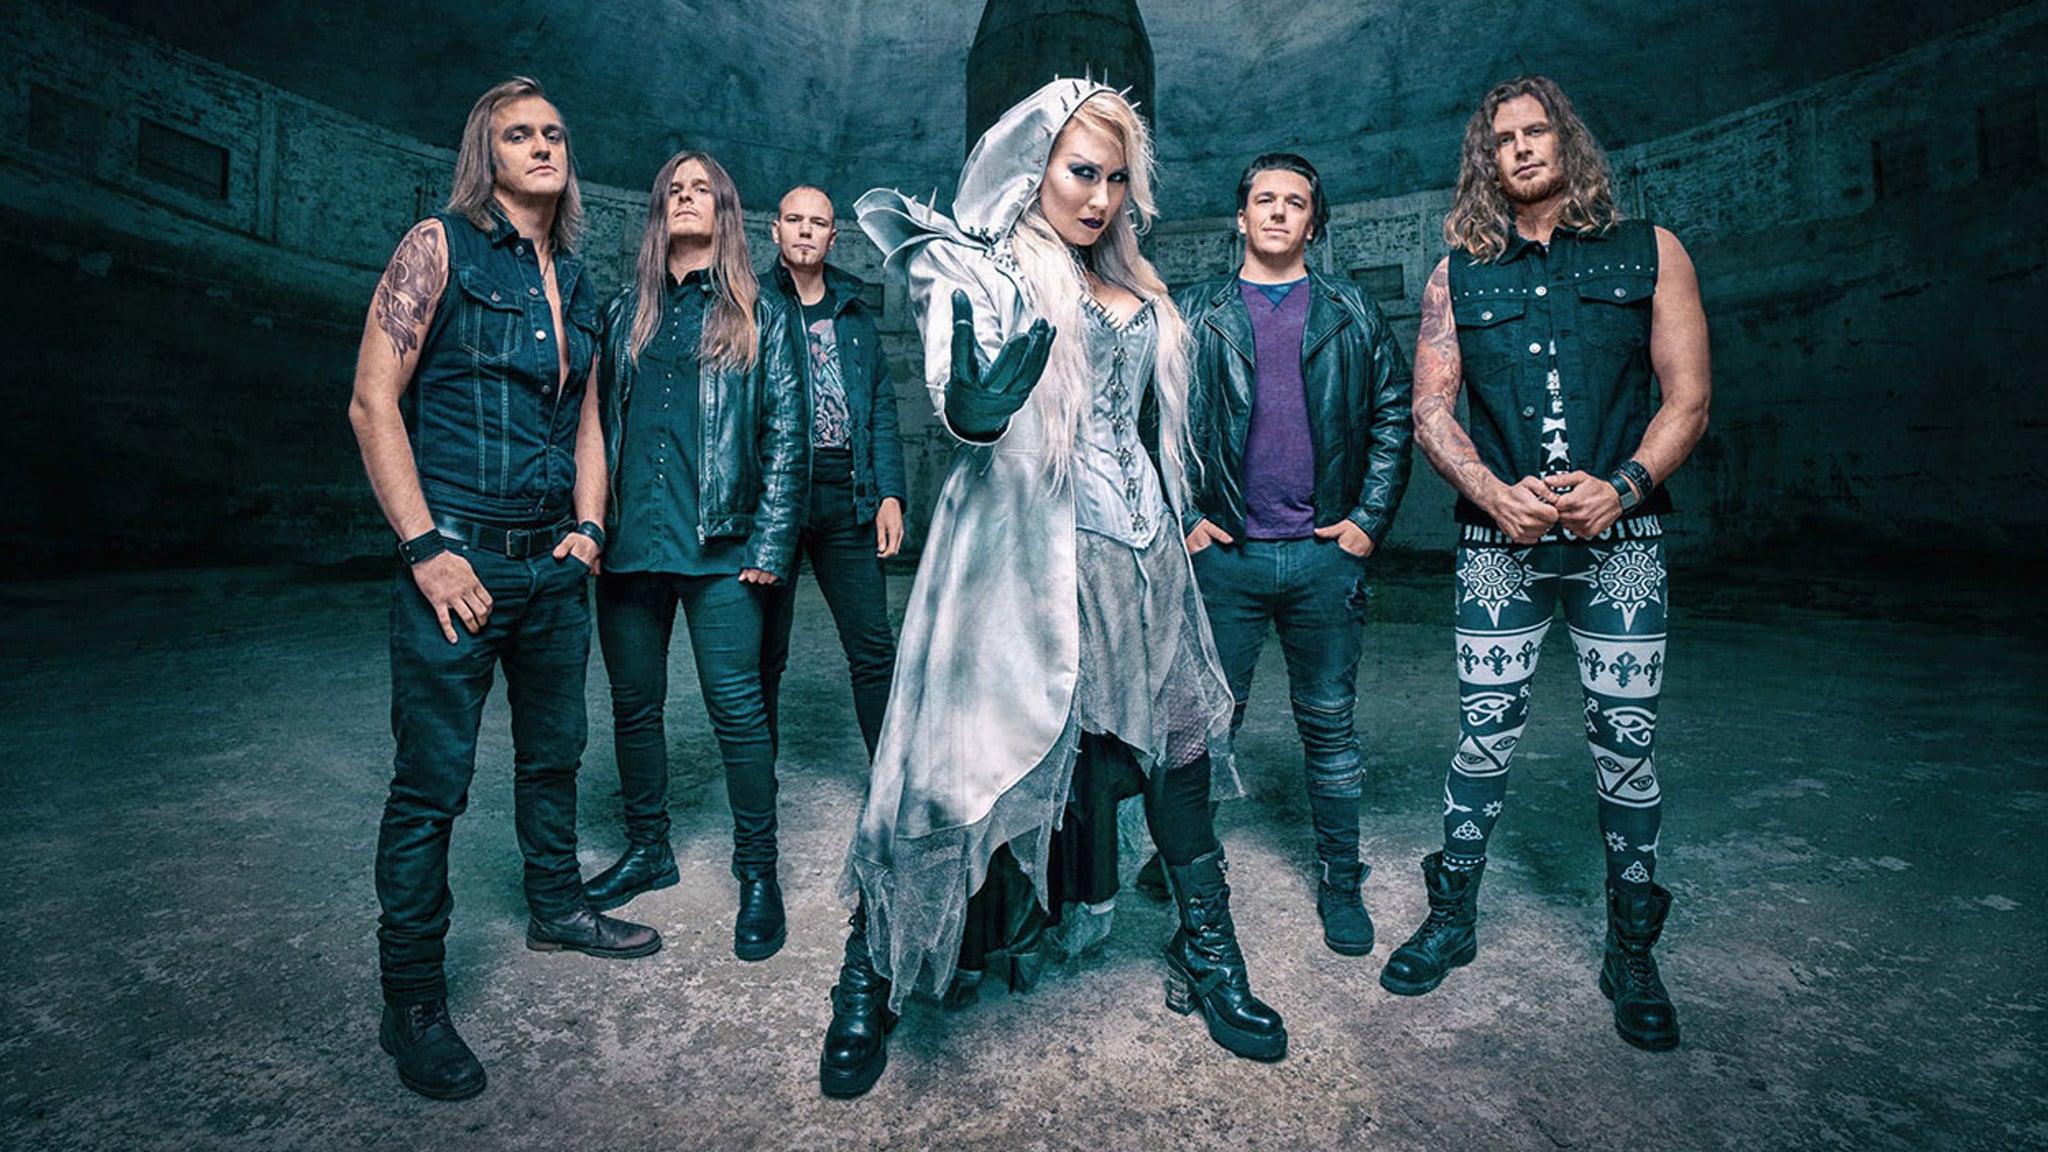 Battle Beast Circus Of Doom Over North America presale passcode for show tickets in New York, NY (Gramercy Theatre)